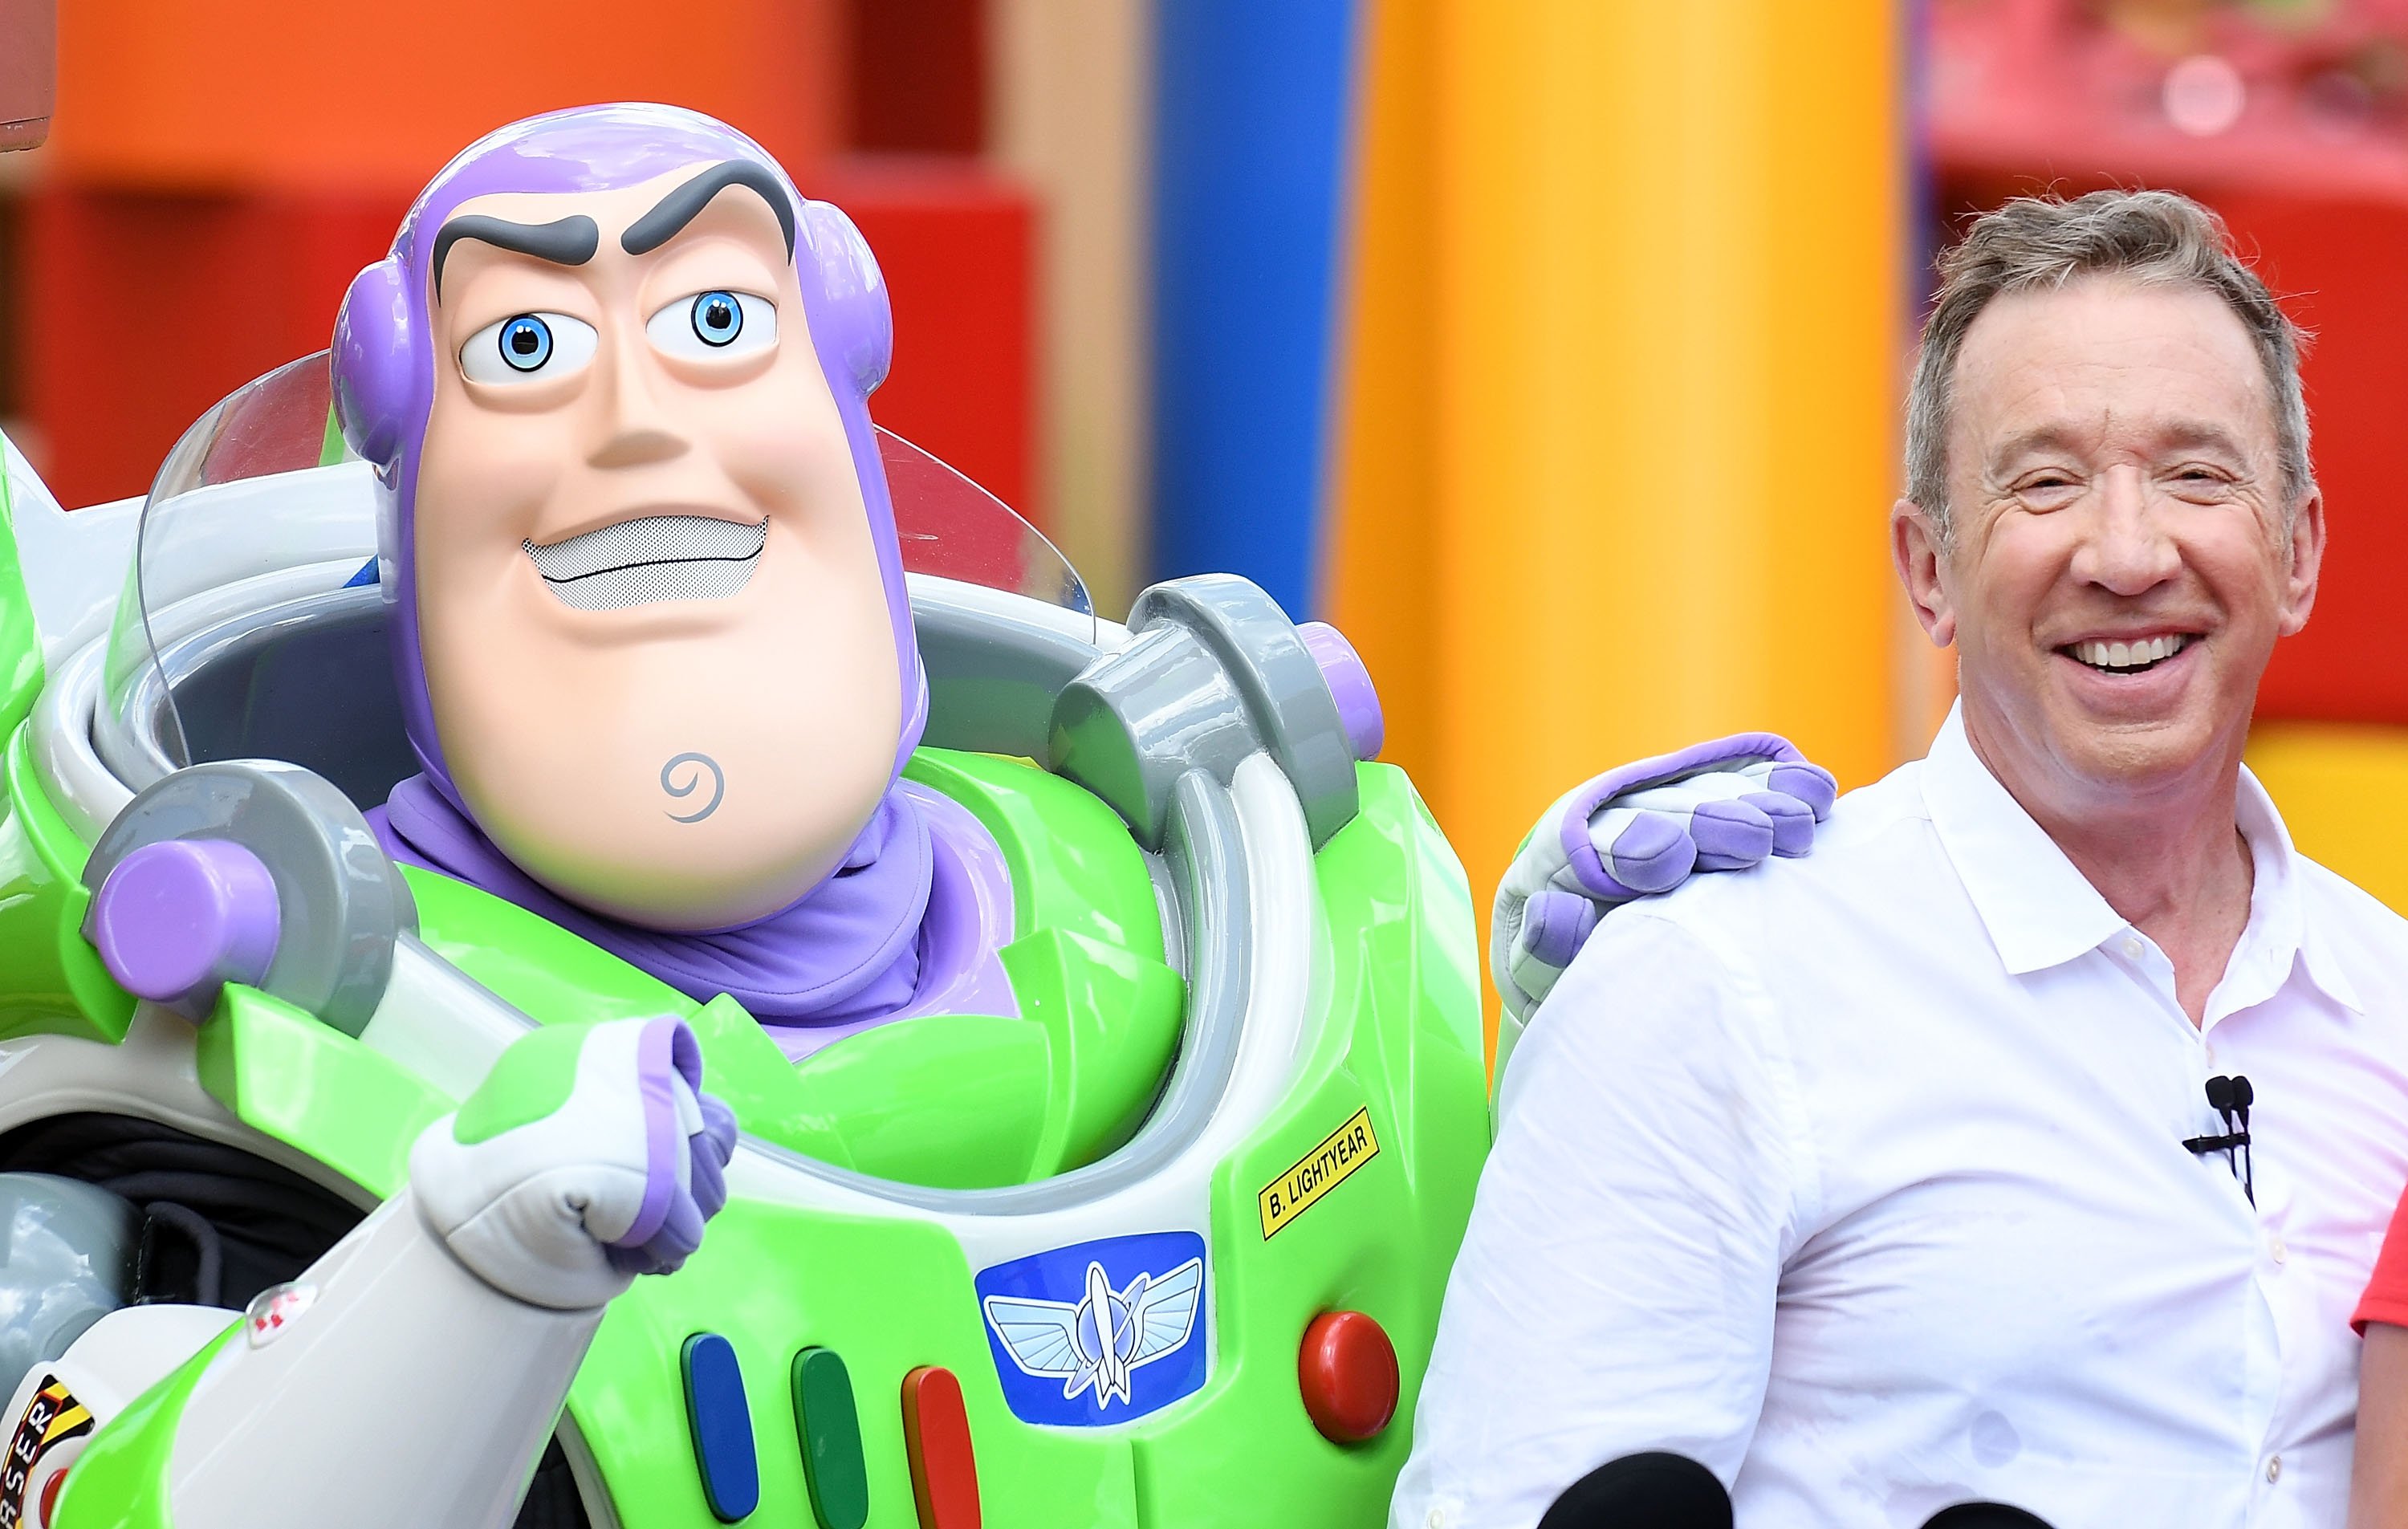 Toy Story actor Tim Allen poses with Buzz Lightyear at Toy Story Land at Disney's Hollywood Studios in Florida